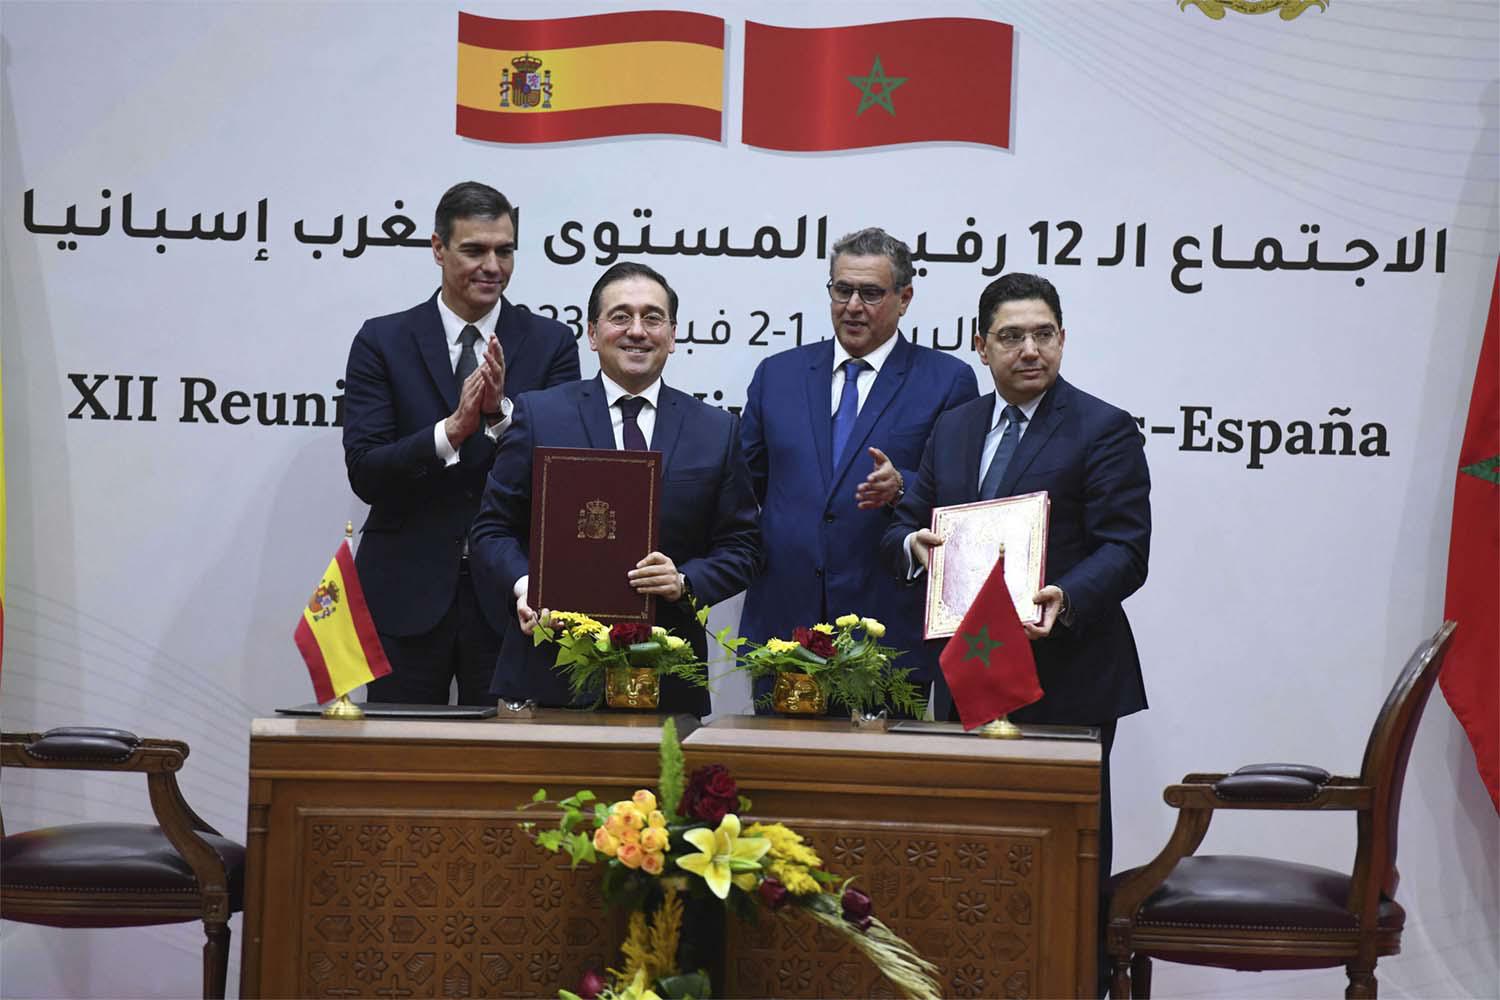 20 agreements signed between Morocco and Spain